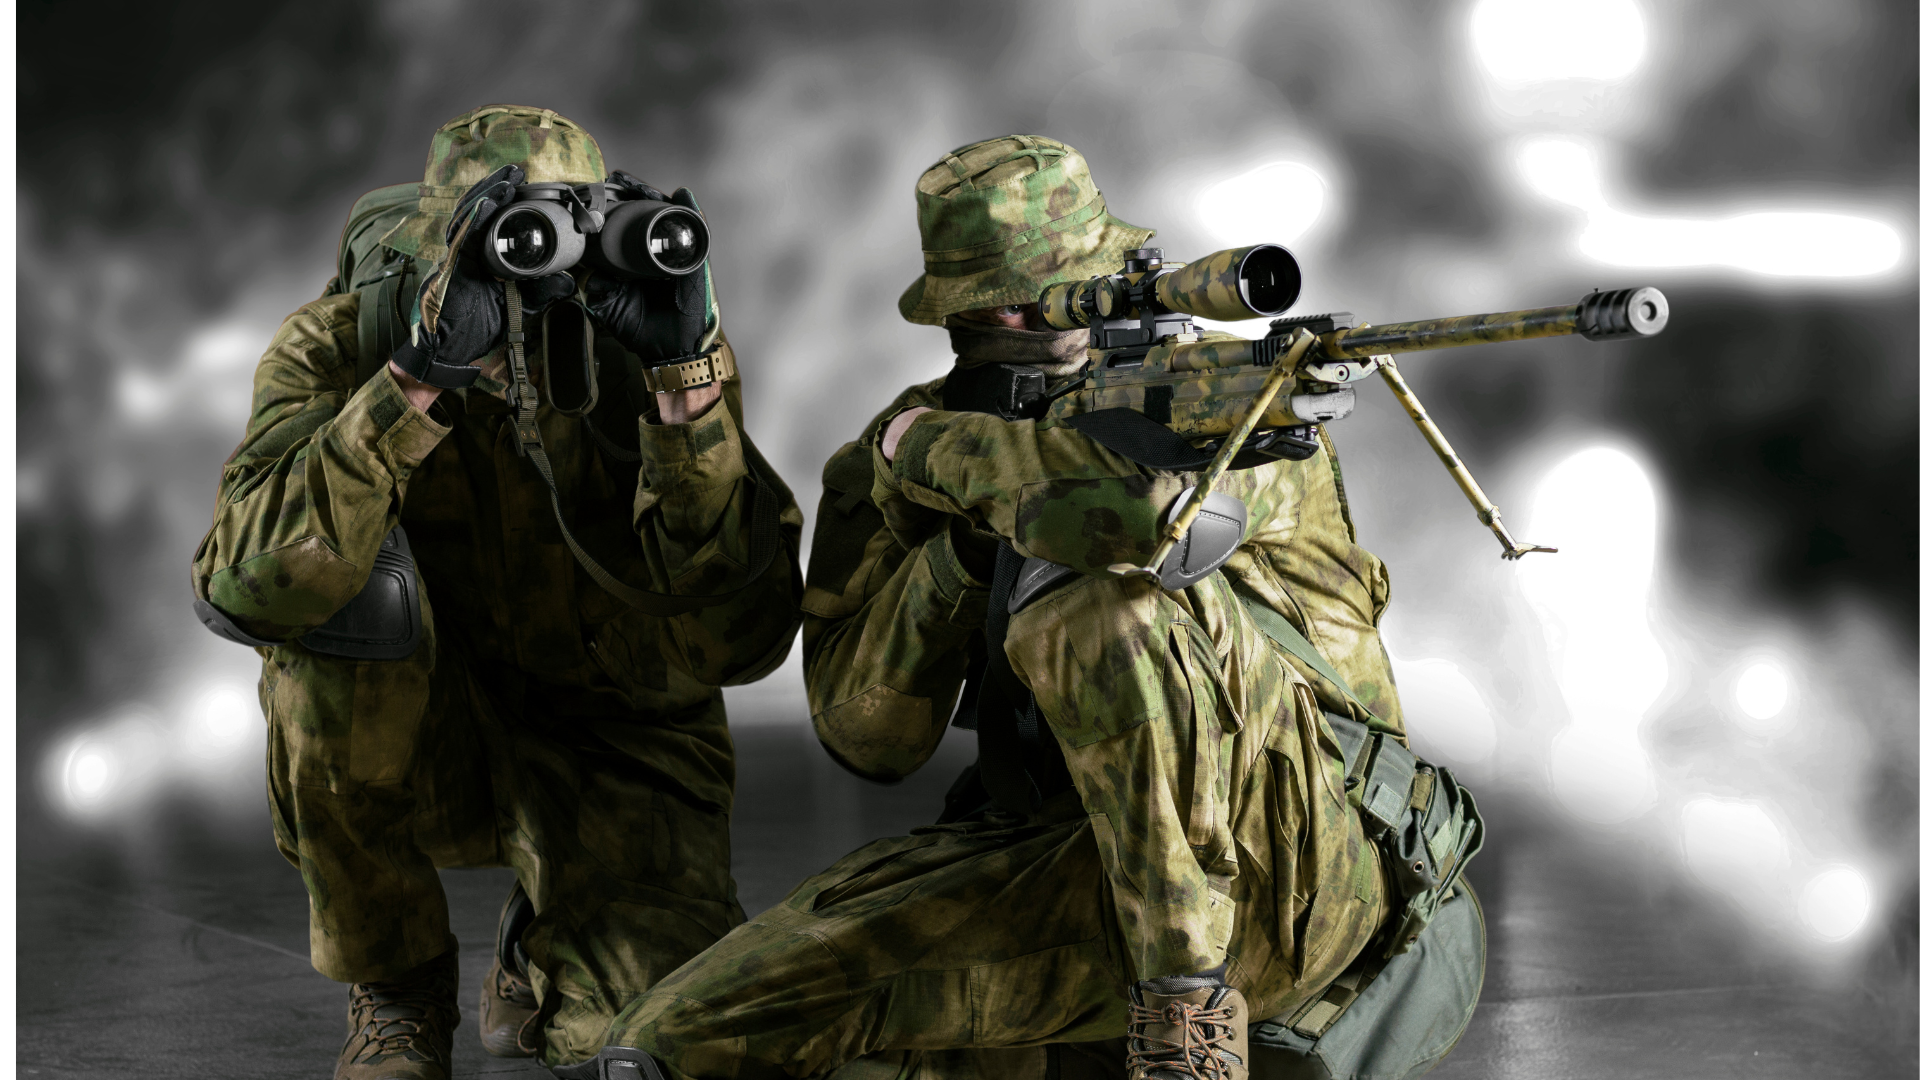 night vision system of two soldiers